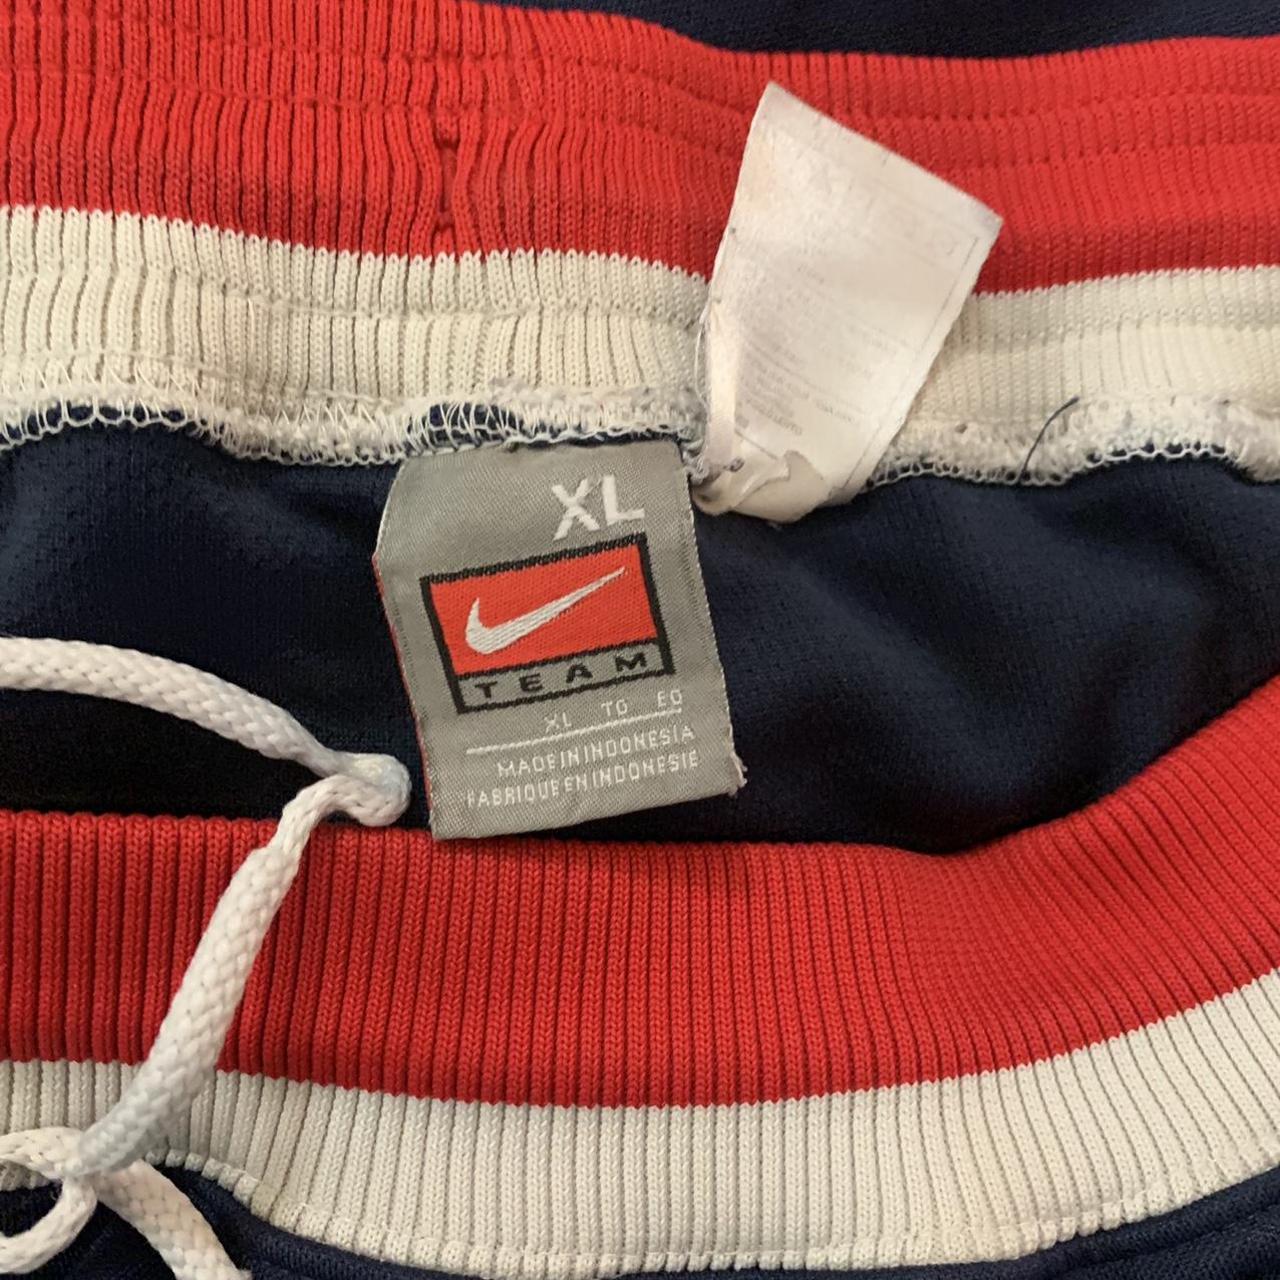 Nike Men's Blue and Red Shorts | Depop